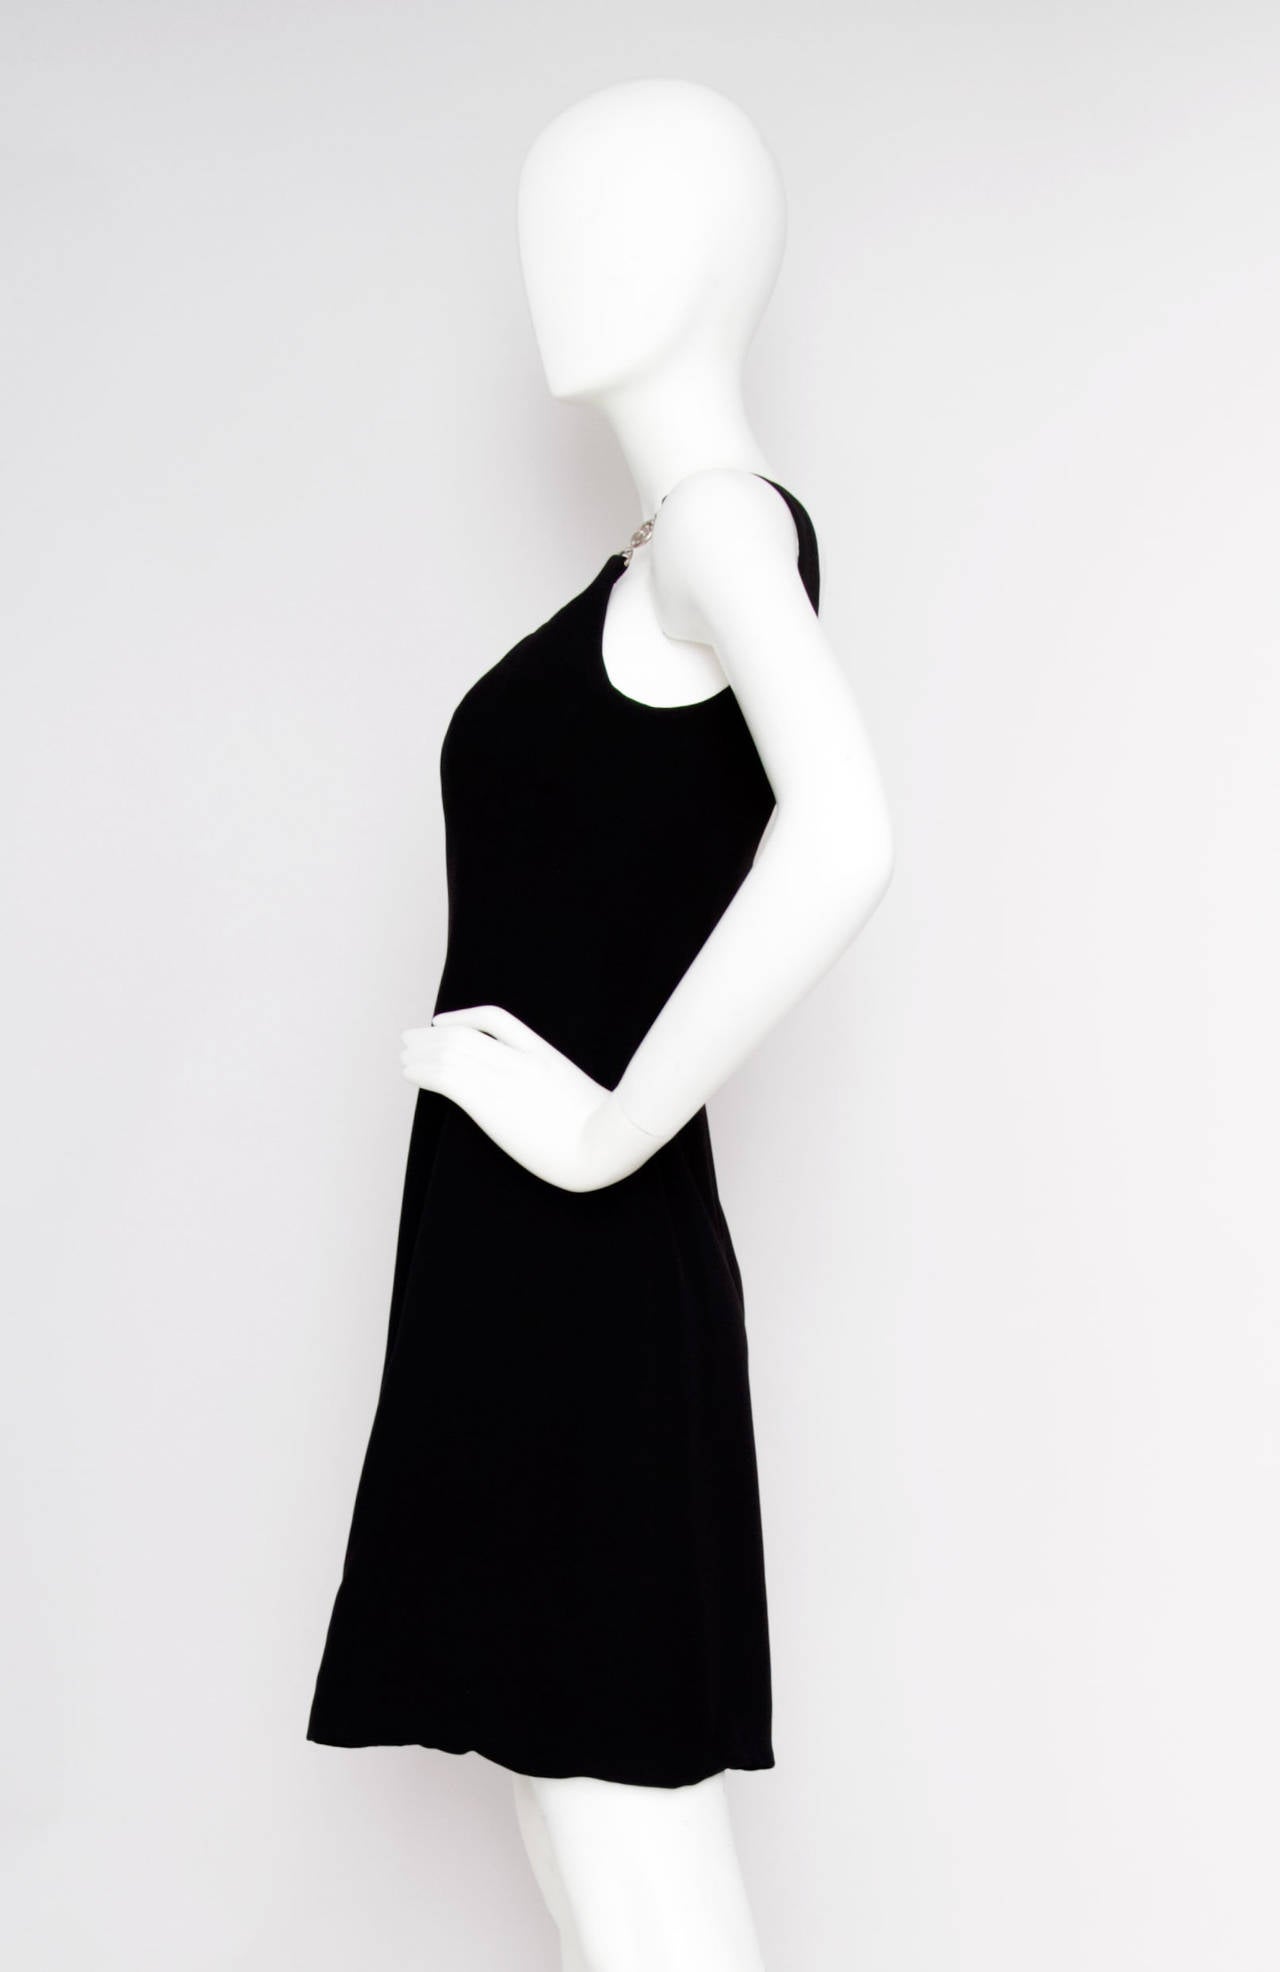 A 1960s inspired 1990s Vesace black mini dress, labelled: “Gianni Versace Couture” in black silk crêpe, structured bodice and silvertone Medusa-head buckles.

The dress is equivalent to a modern size Small.